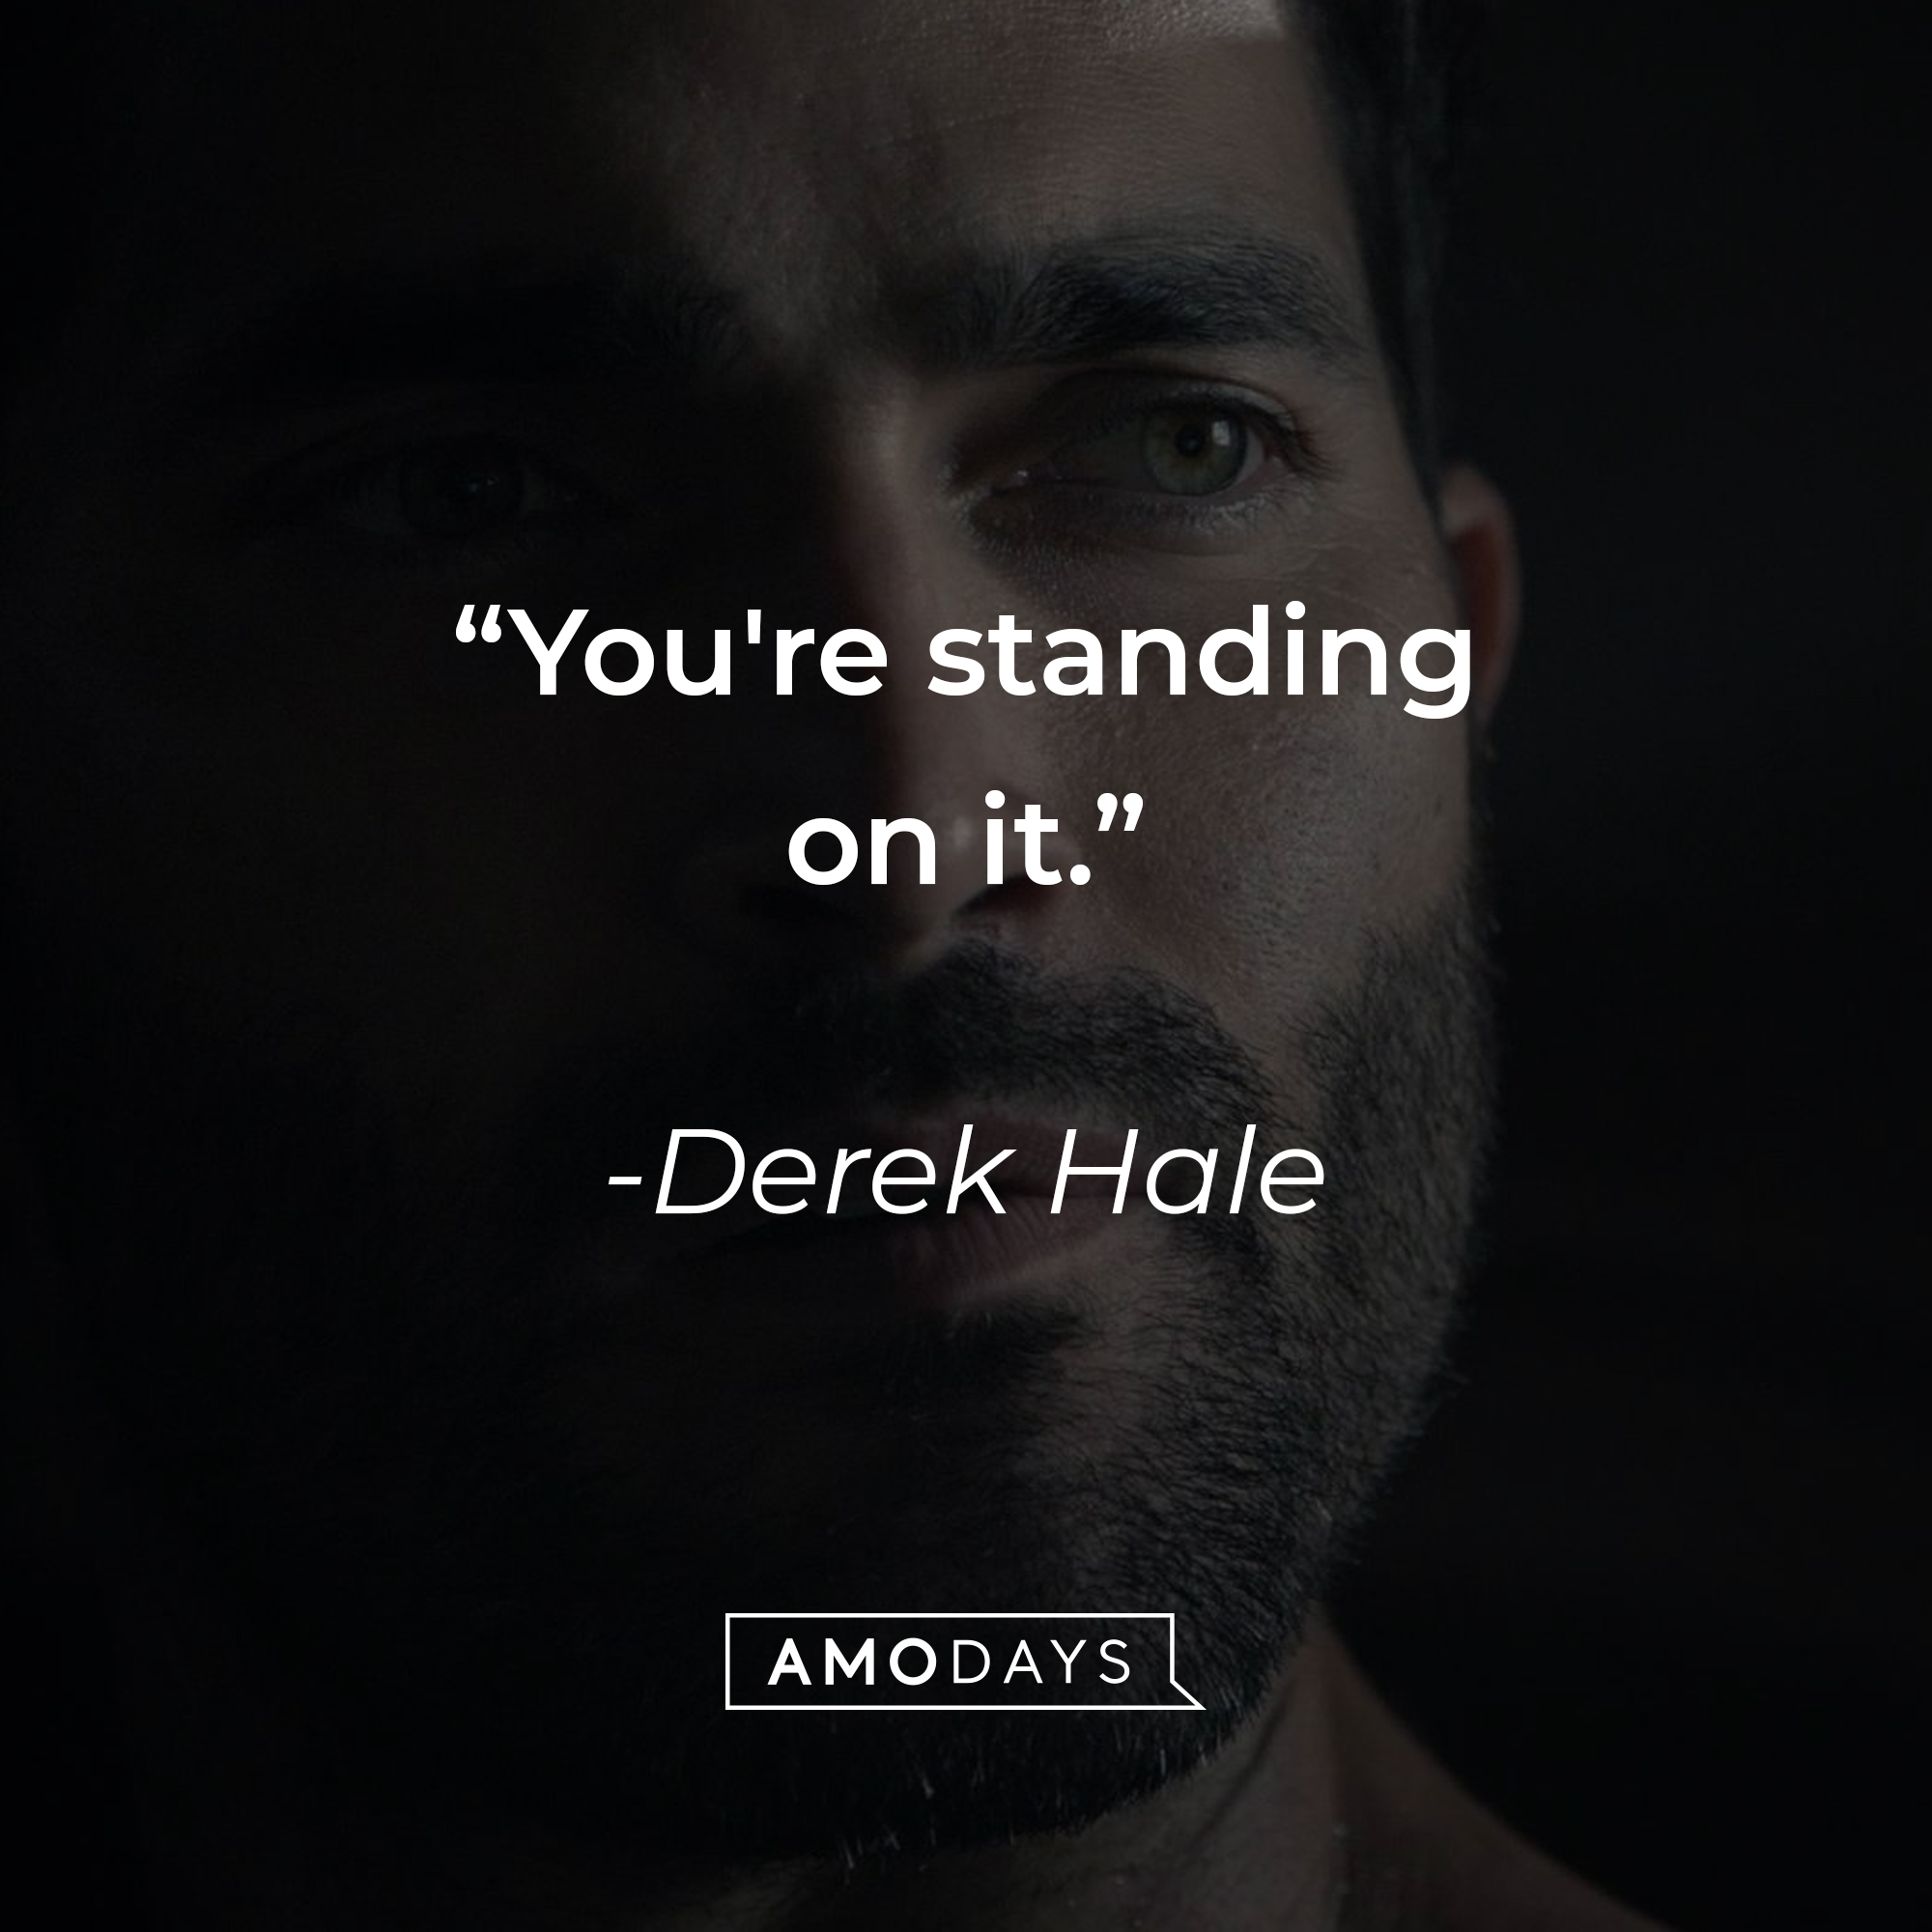 Derek Hale, with his quote: “You're standing on it.” | Source: Amodays